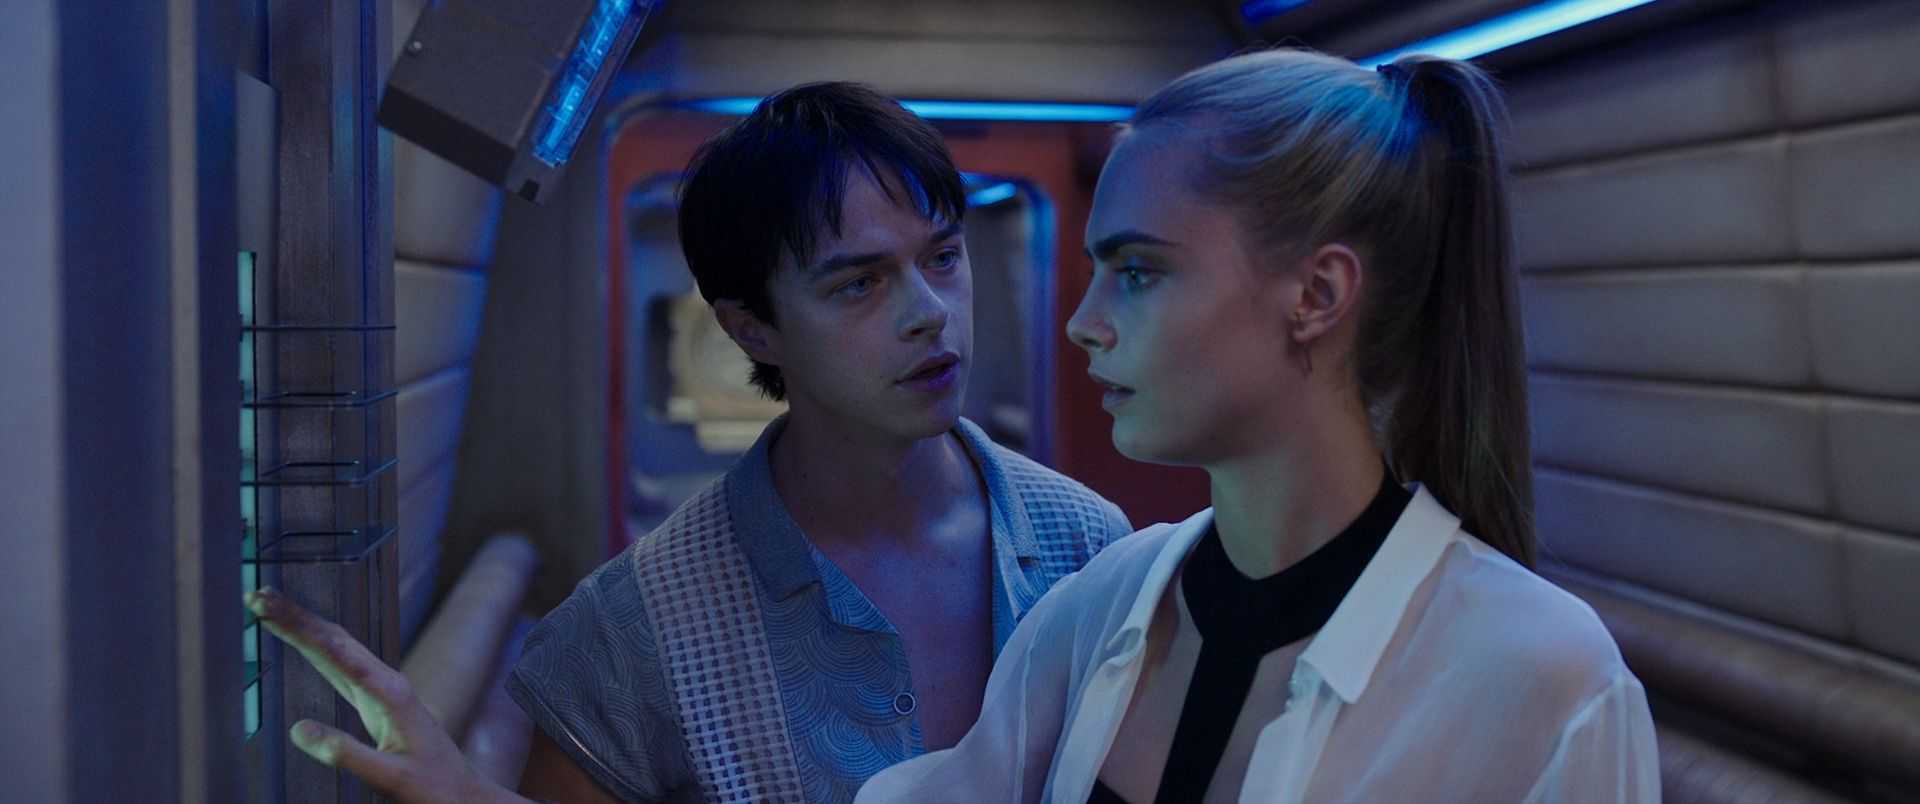 Валериан и город тысячи планет -valerian and the city of a thousand planets